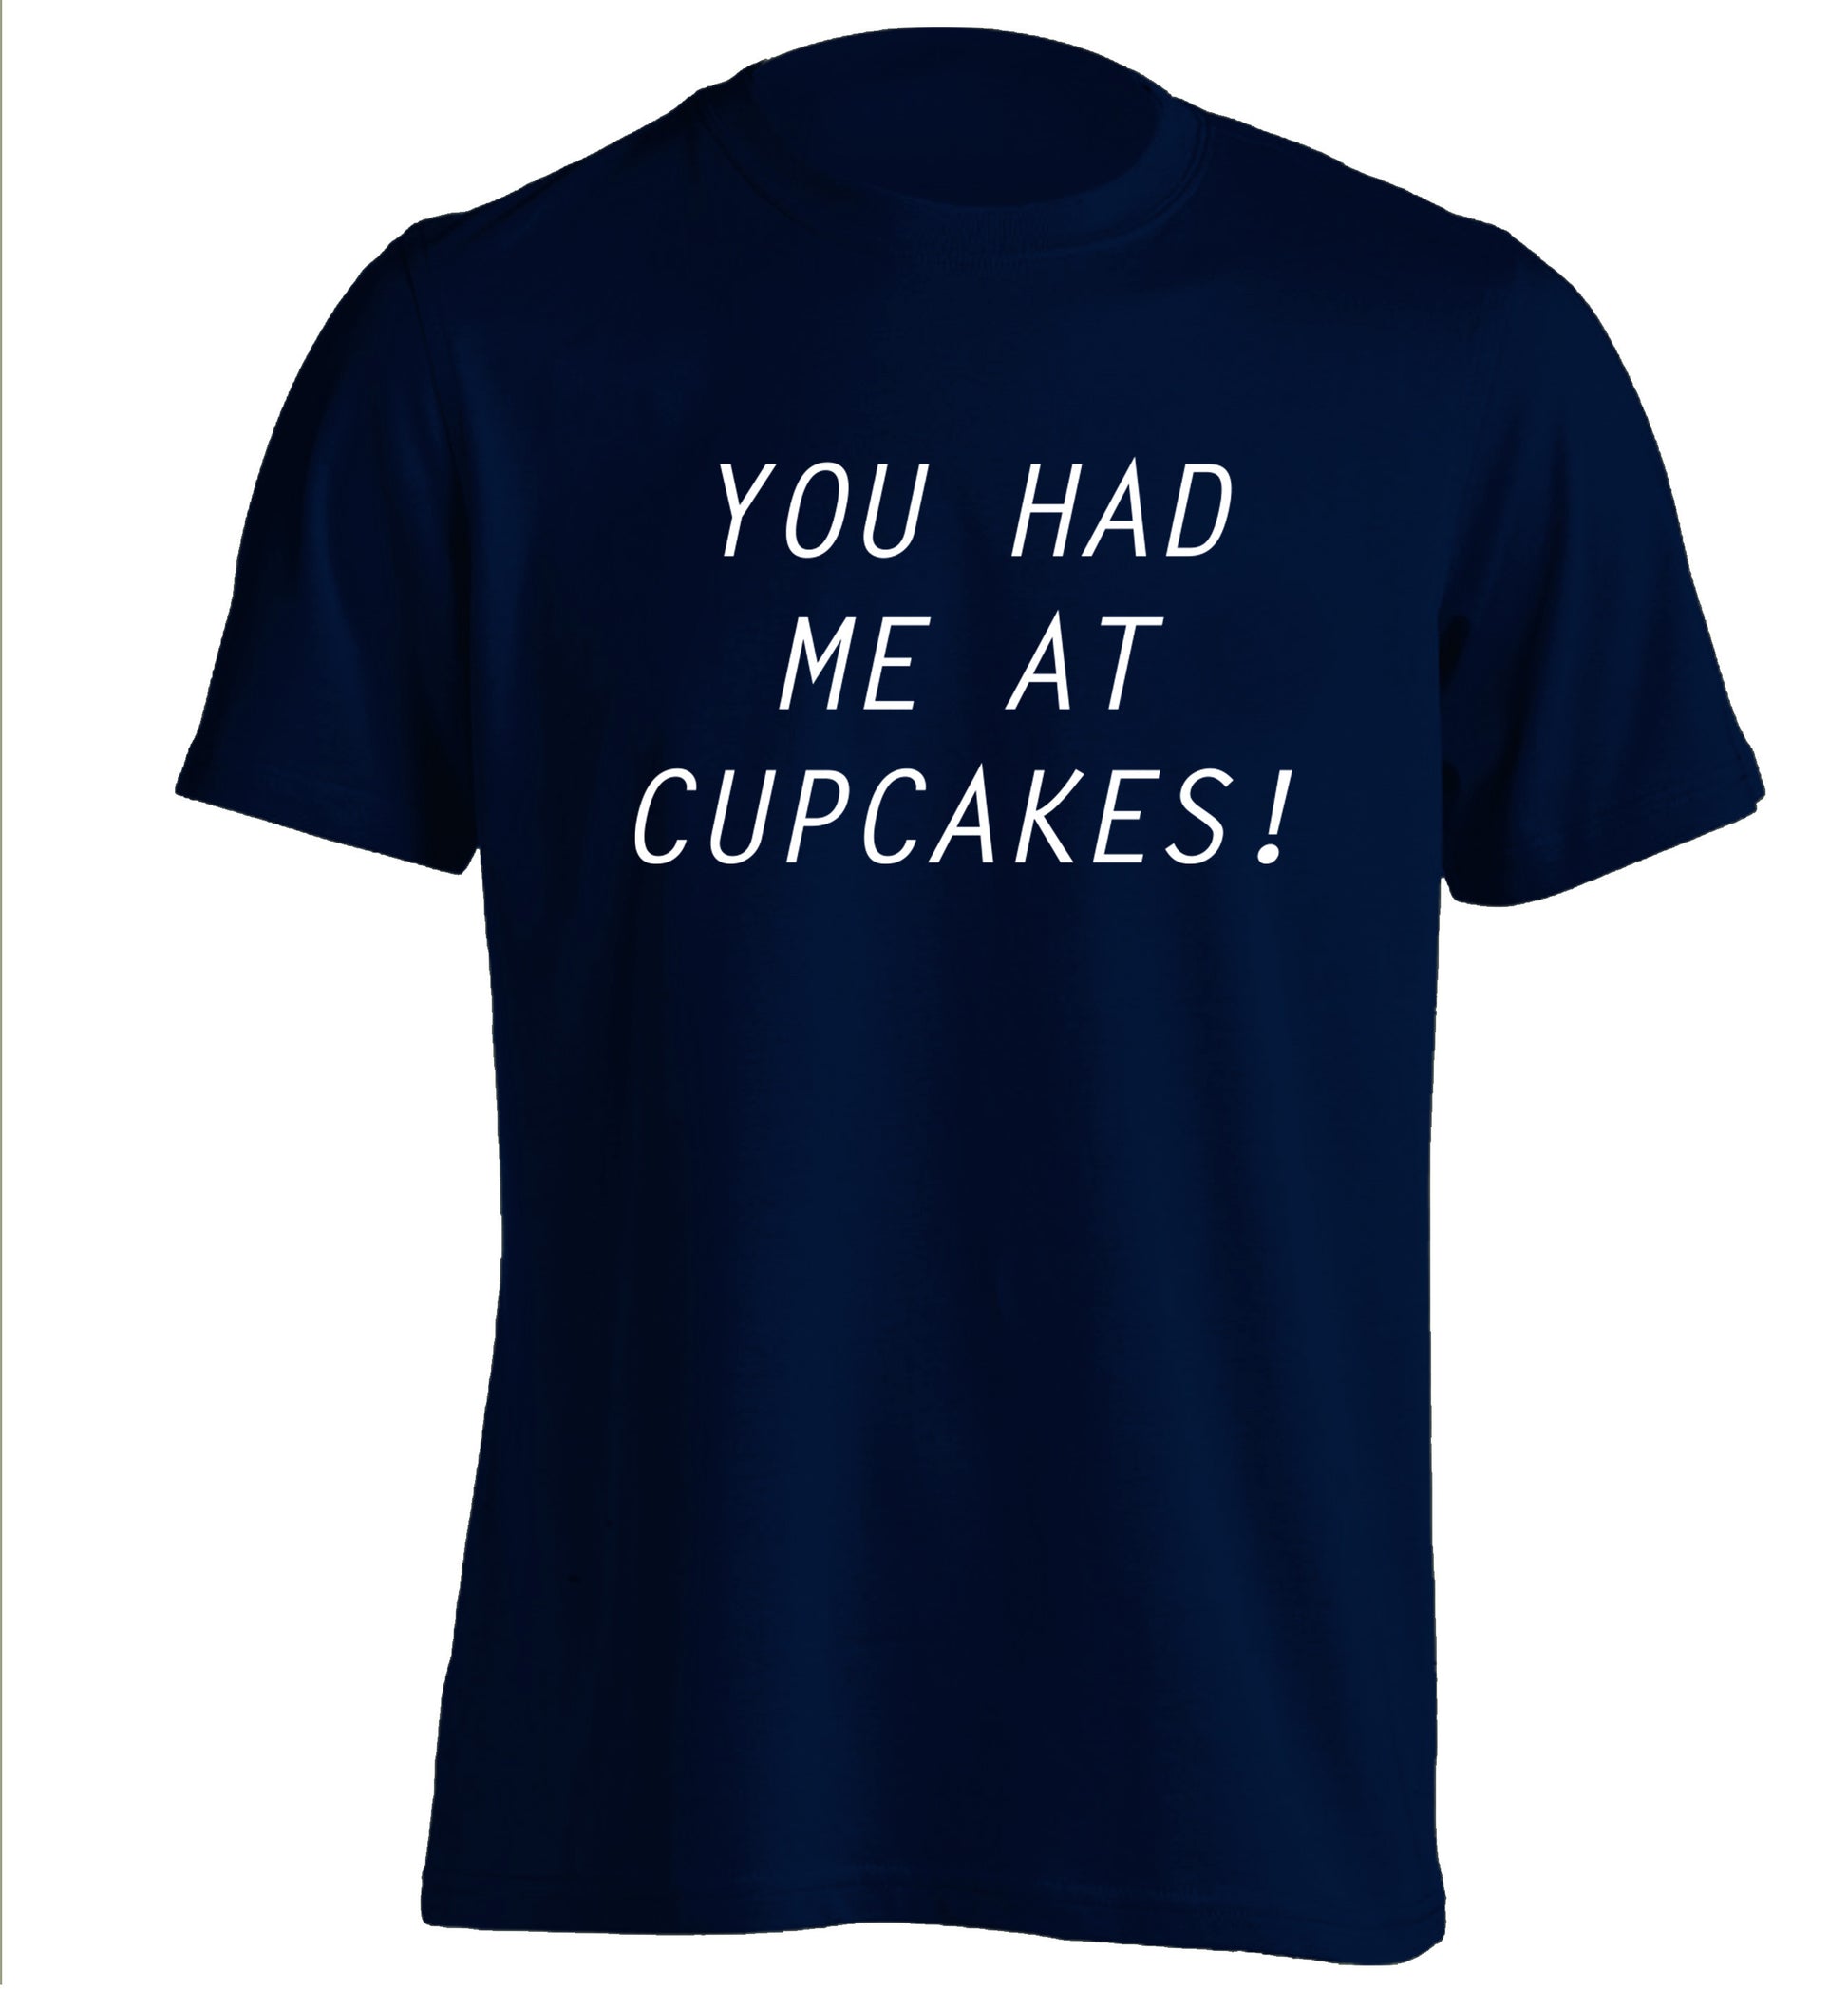 You had me at cupcakes adults unisex navy Tshirt 2XL